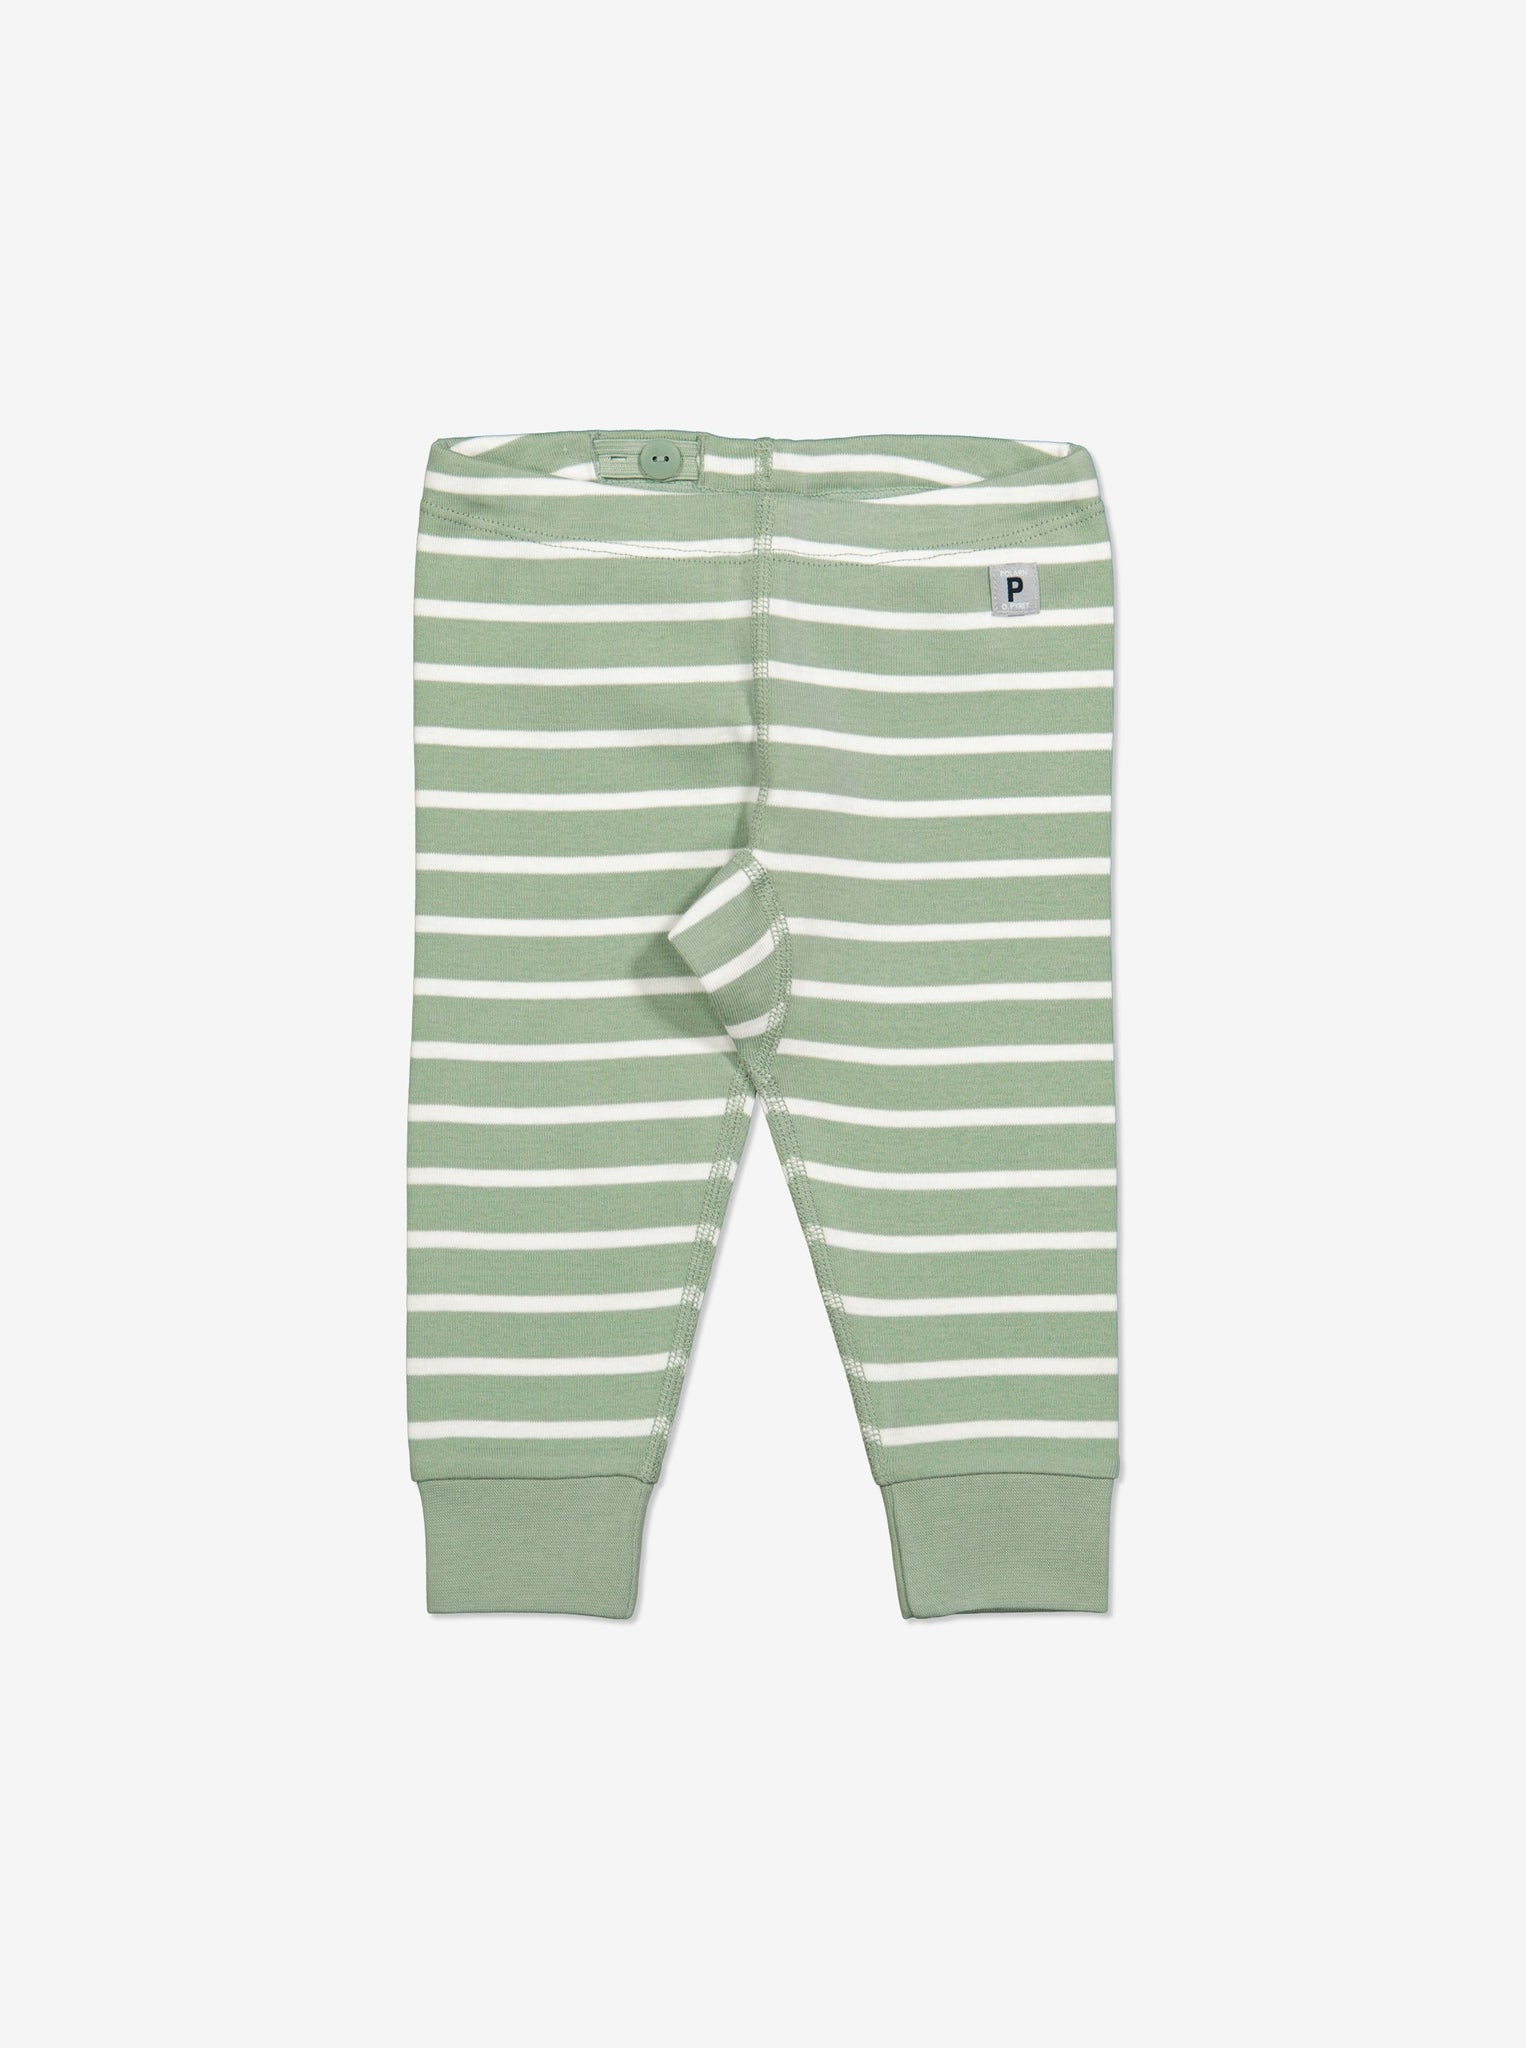  Organic Striped Green Baby Leggings from Polarn O. Pyret Kidswear. Made with 100% organic cotton.